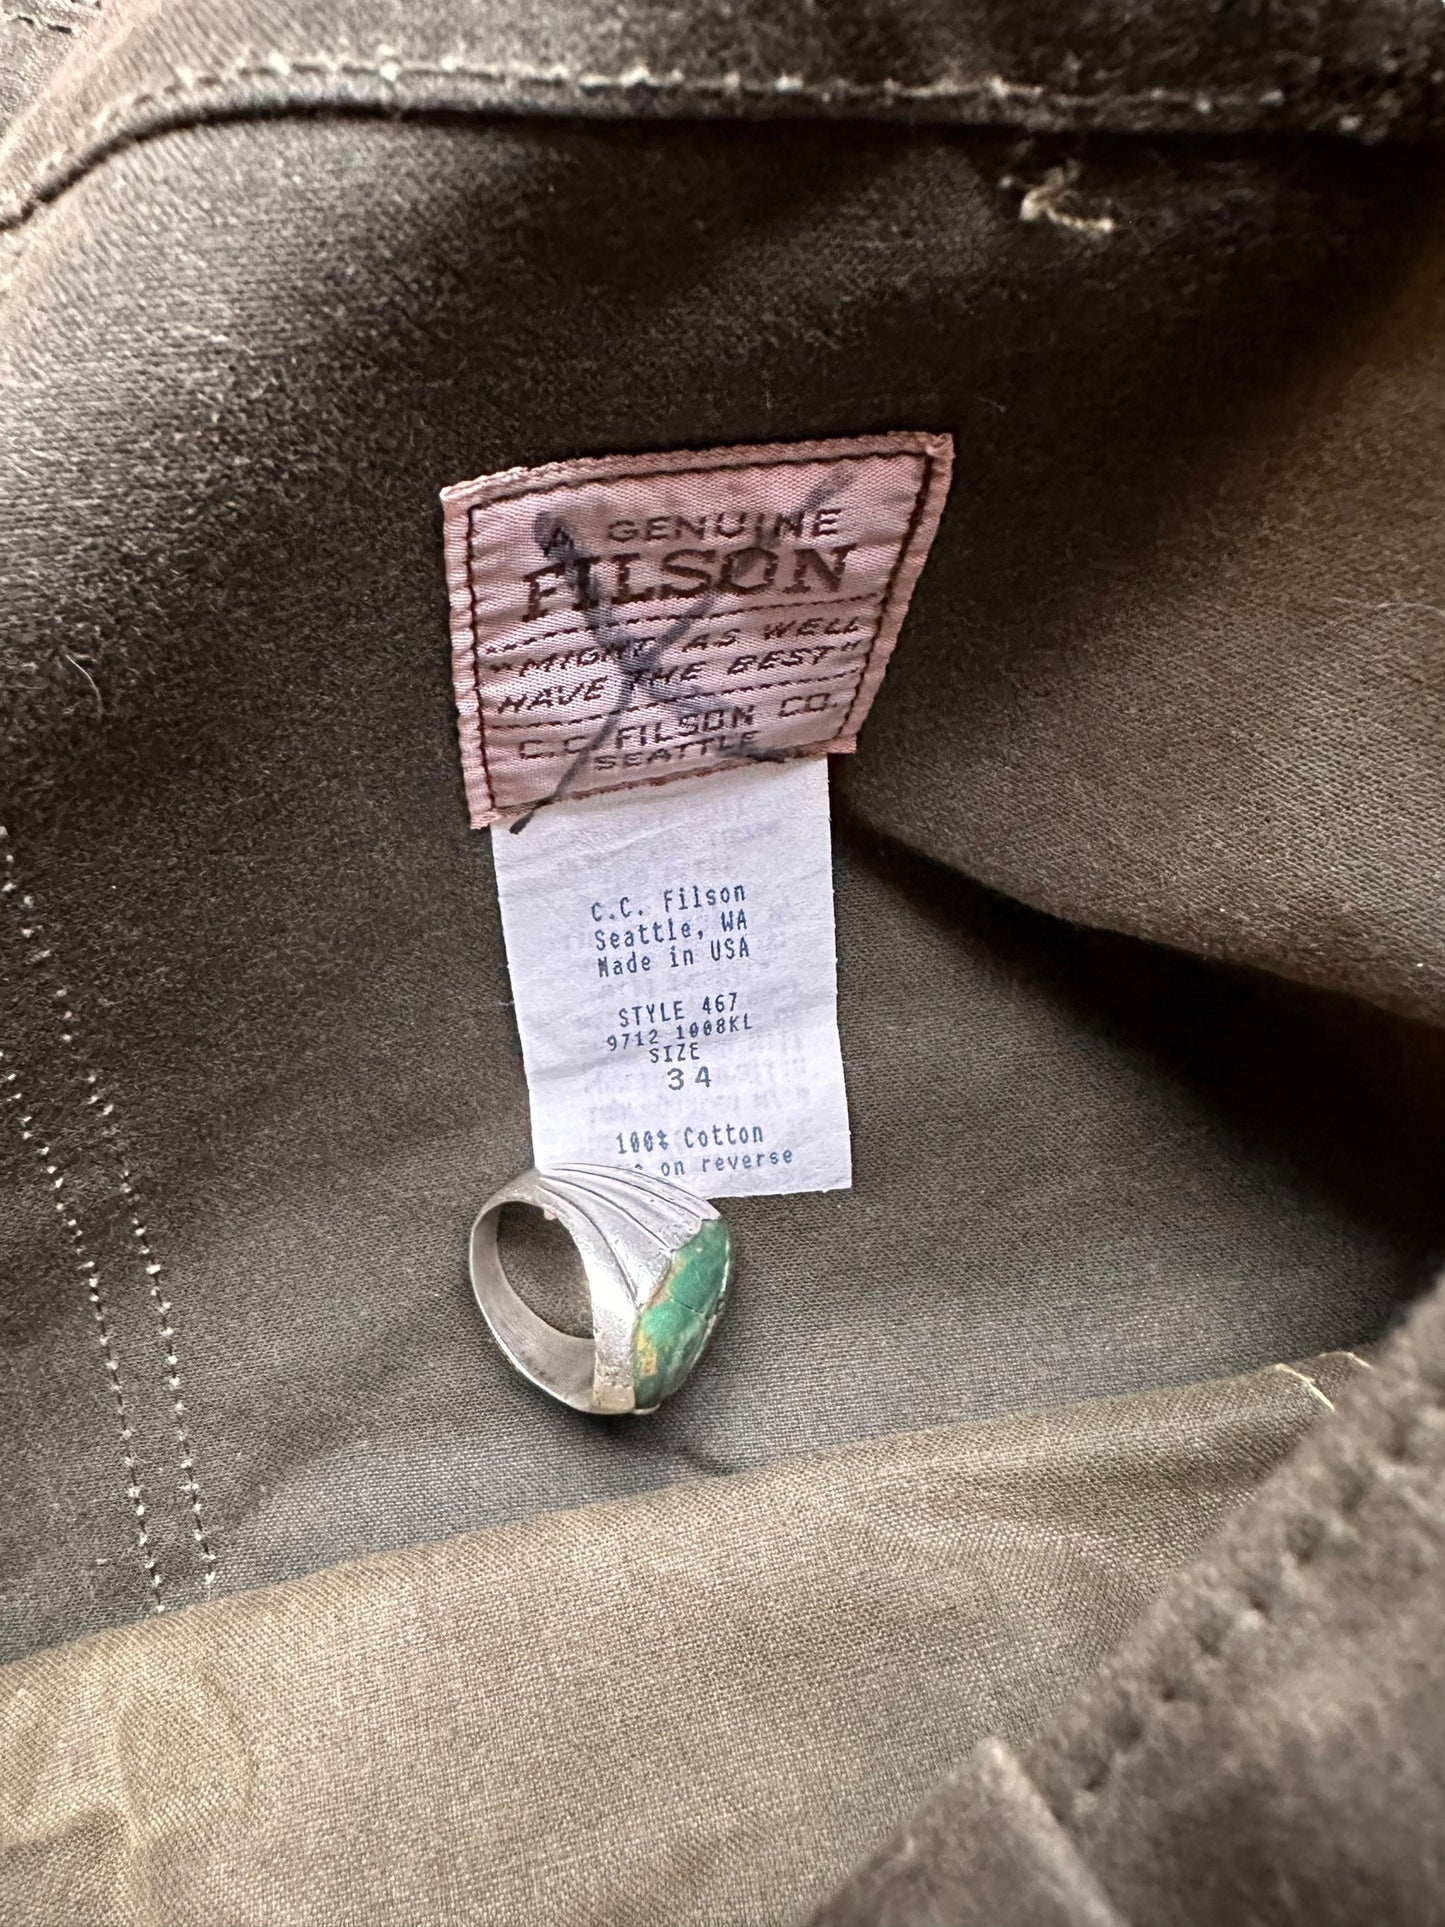 Tag View of Vintage Filson Tin Cloth Double Hunting Pants W34 |  Barn Owl Vintage Goods | Filson Bargain Outlet Seattle